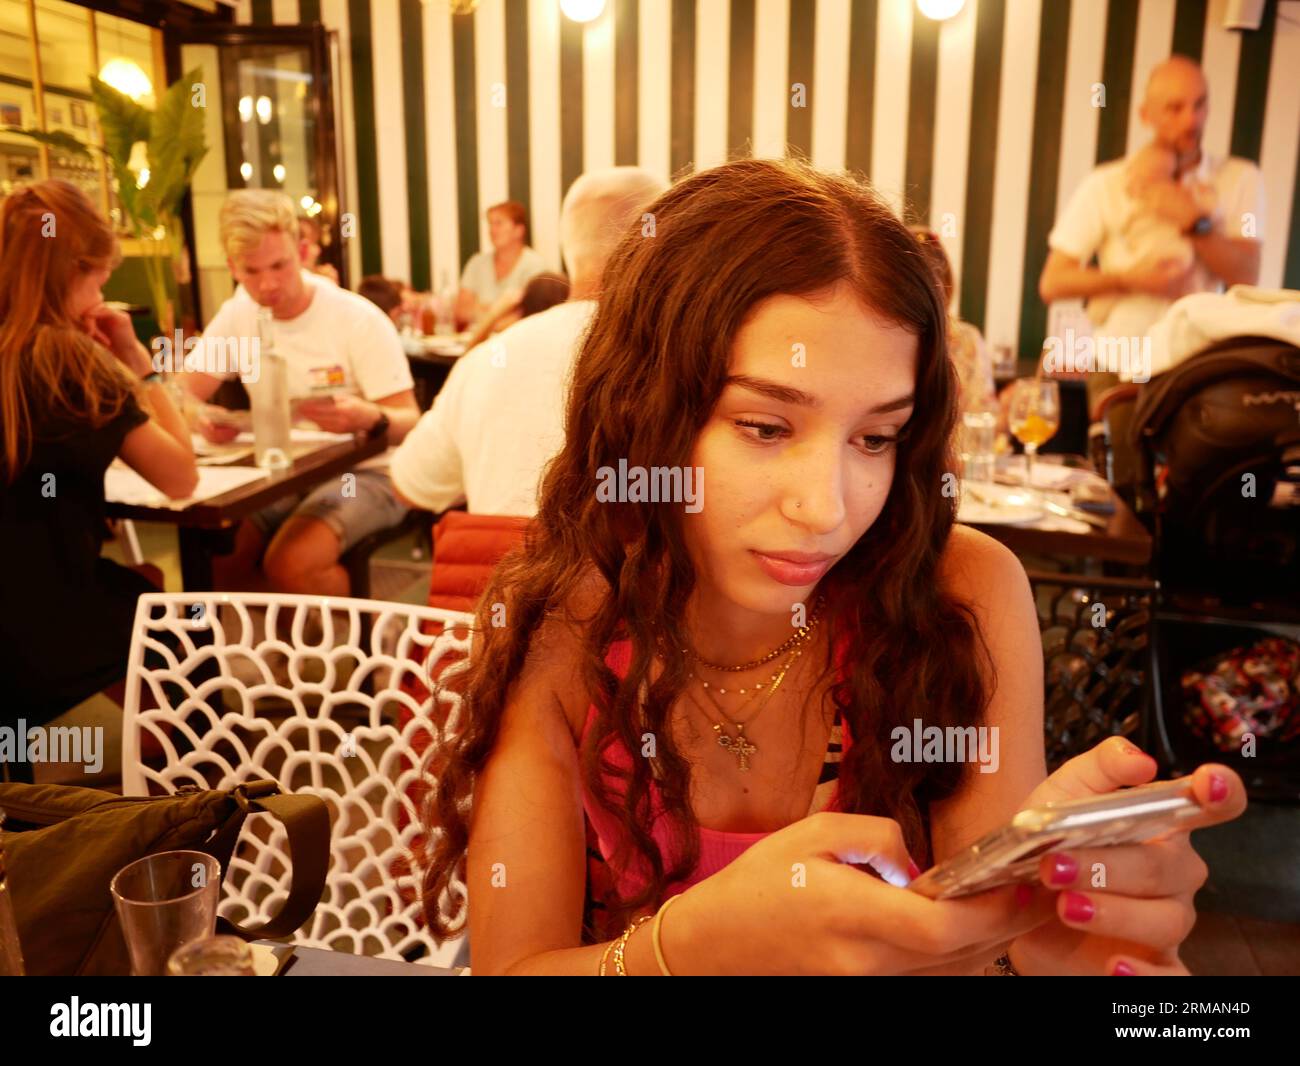 Teenage girl distracted by her mobile phone during dinner in a restaurant. Stock Photo